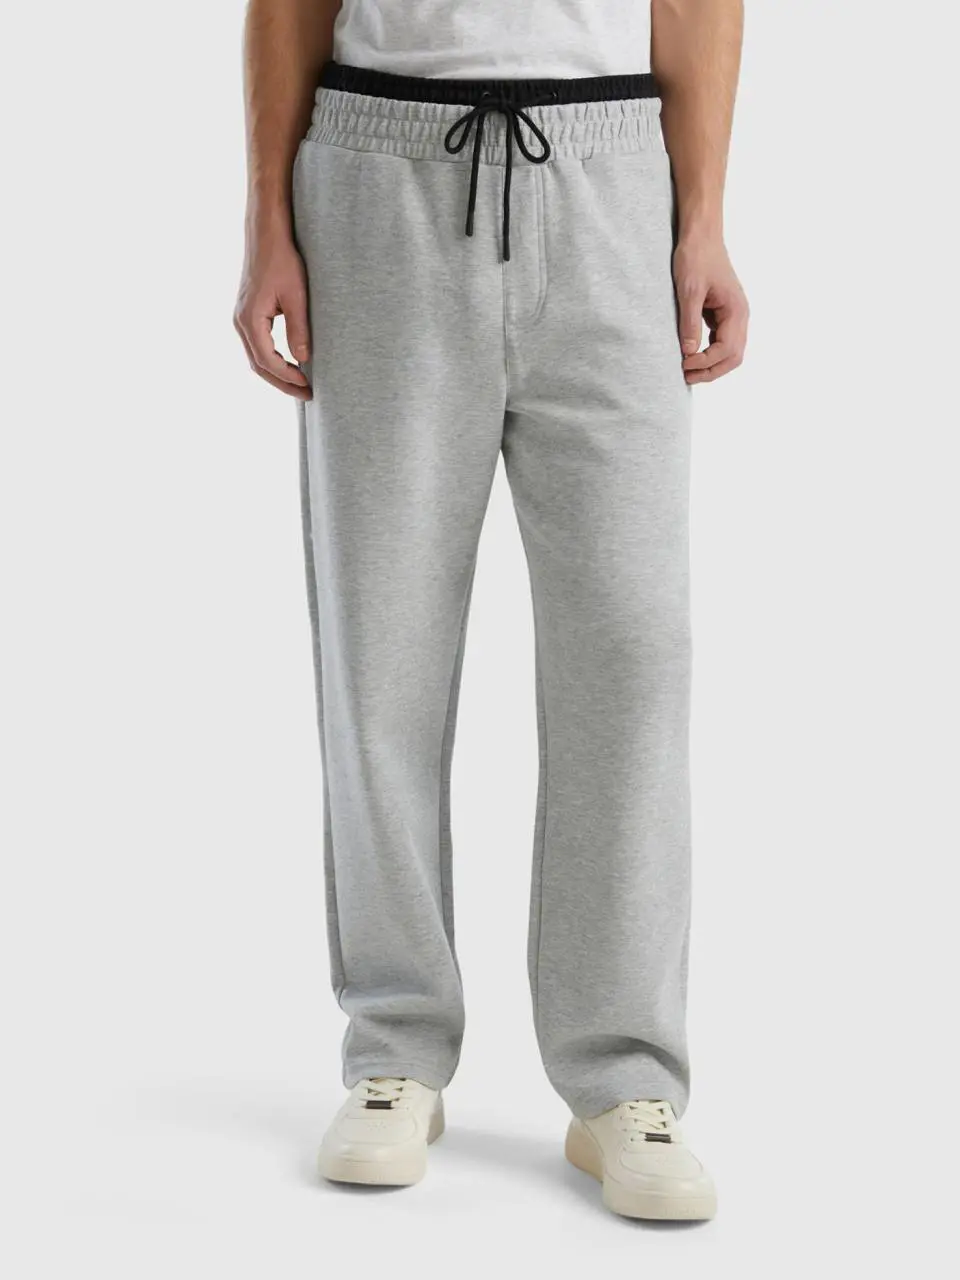 Benetton sweat joggers with drawstring. 1